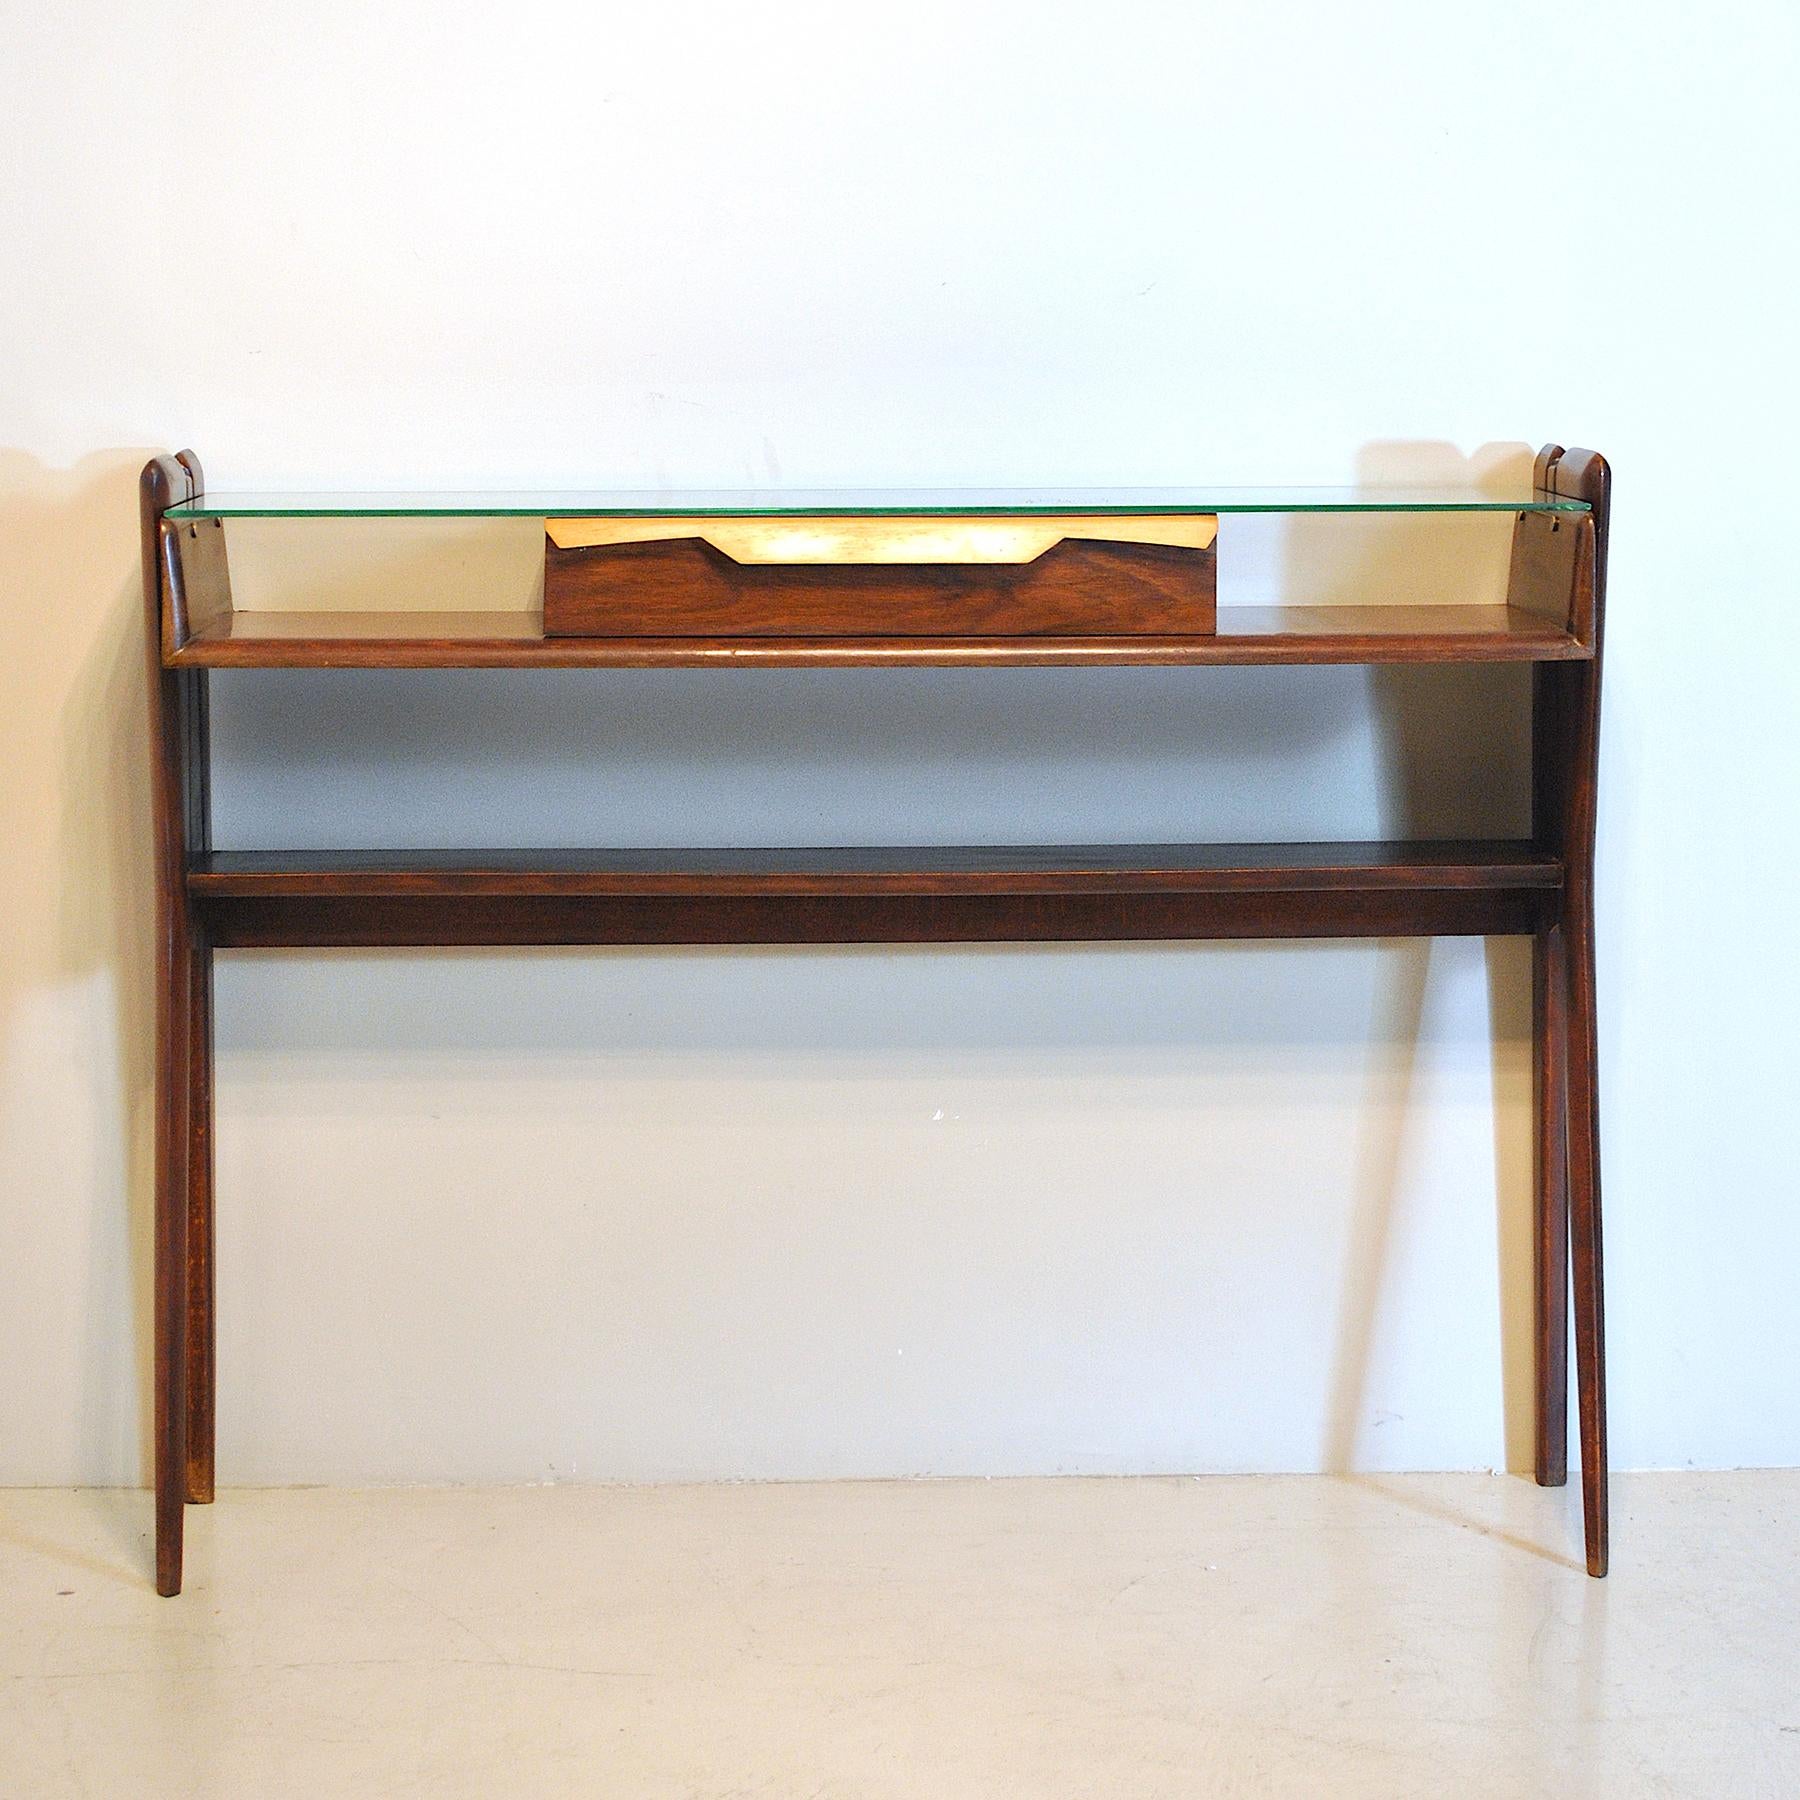 Sculptural console table in dark walnut, narrow with single drawer and glass top, Italian 1950's by Mobili Pennati Egidio in the style of Ico Parisi.